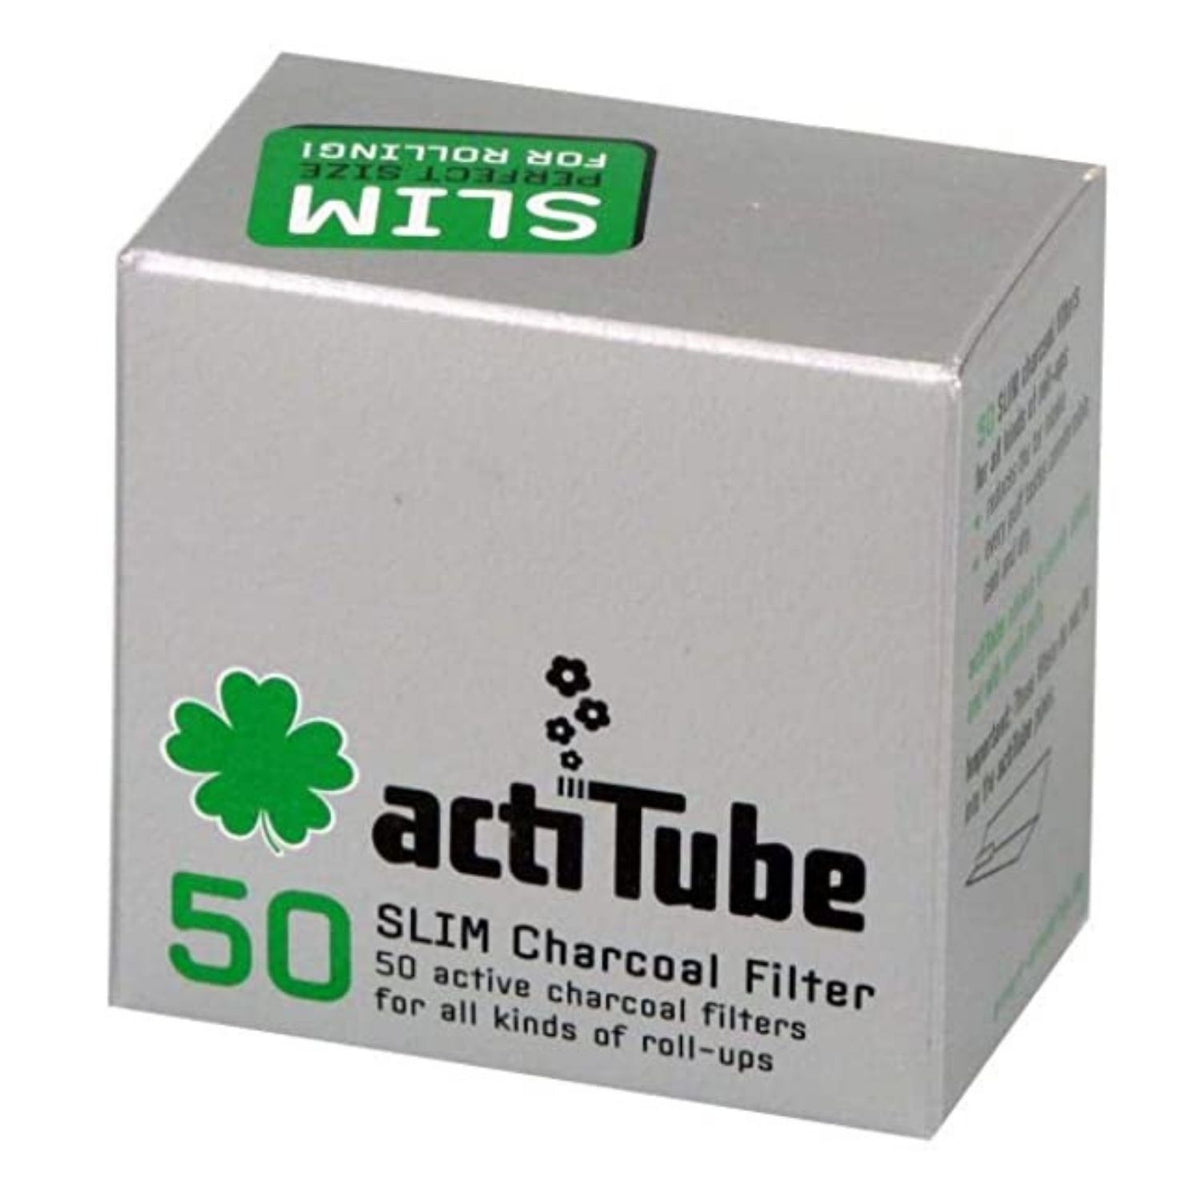 Buy ACTITUBE Activated CHarcoal Extra Slim Filter Pack of 50